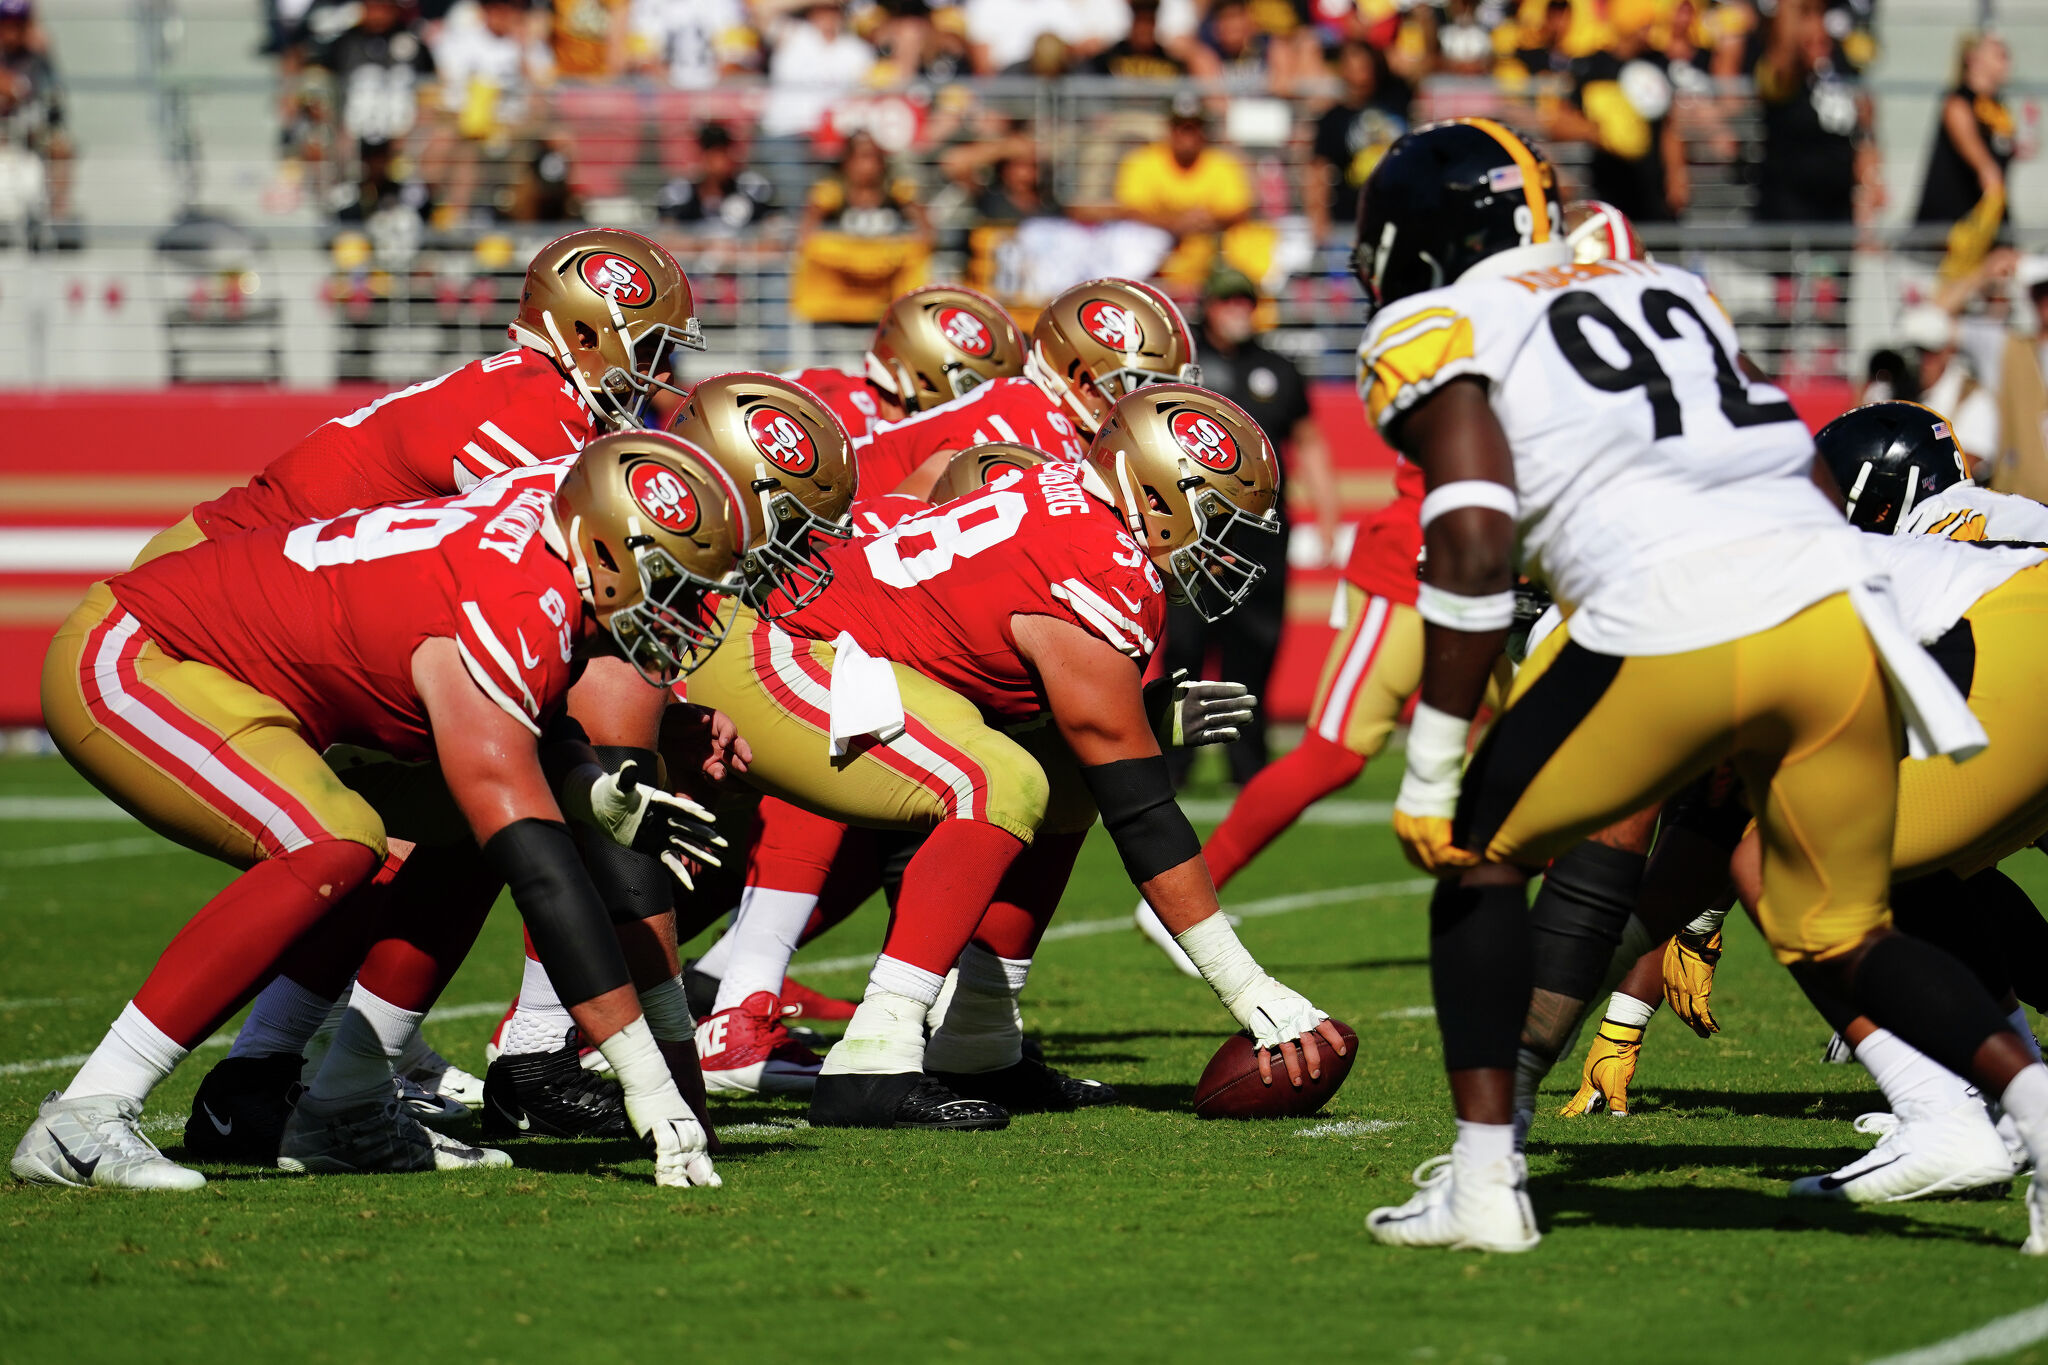 How to watch the 49ers vs Steelers on Sun Sept 10